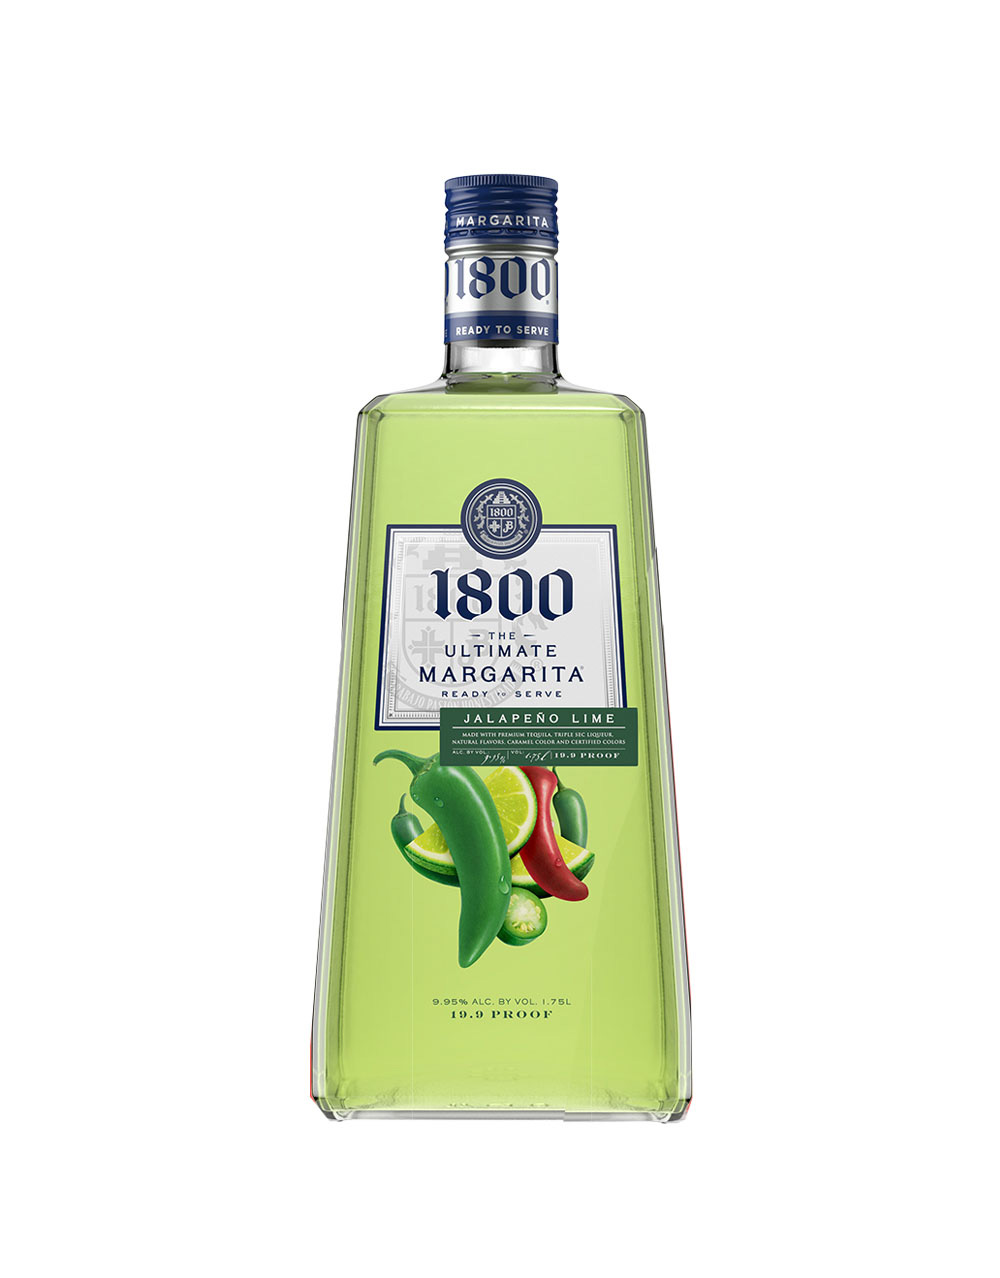 1800 The Ultimate Margarita Jalapeno Lime